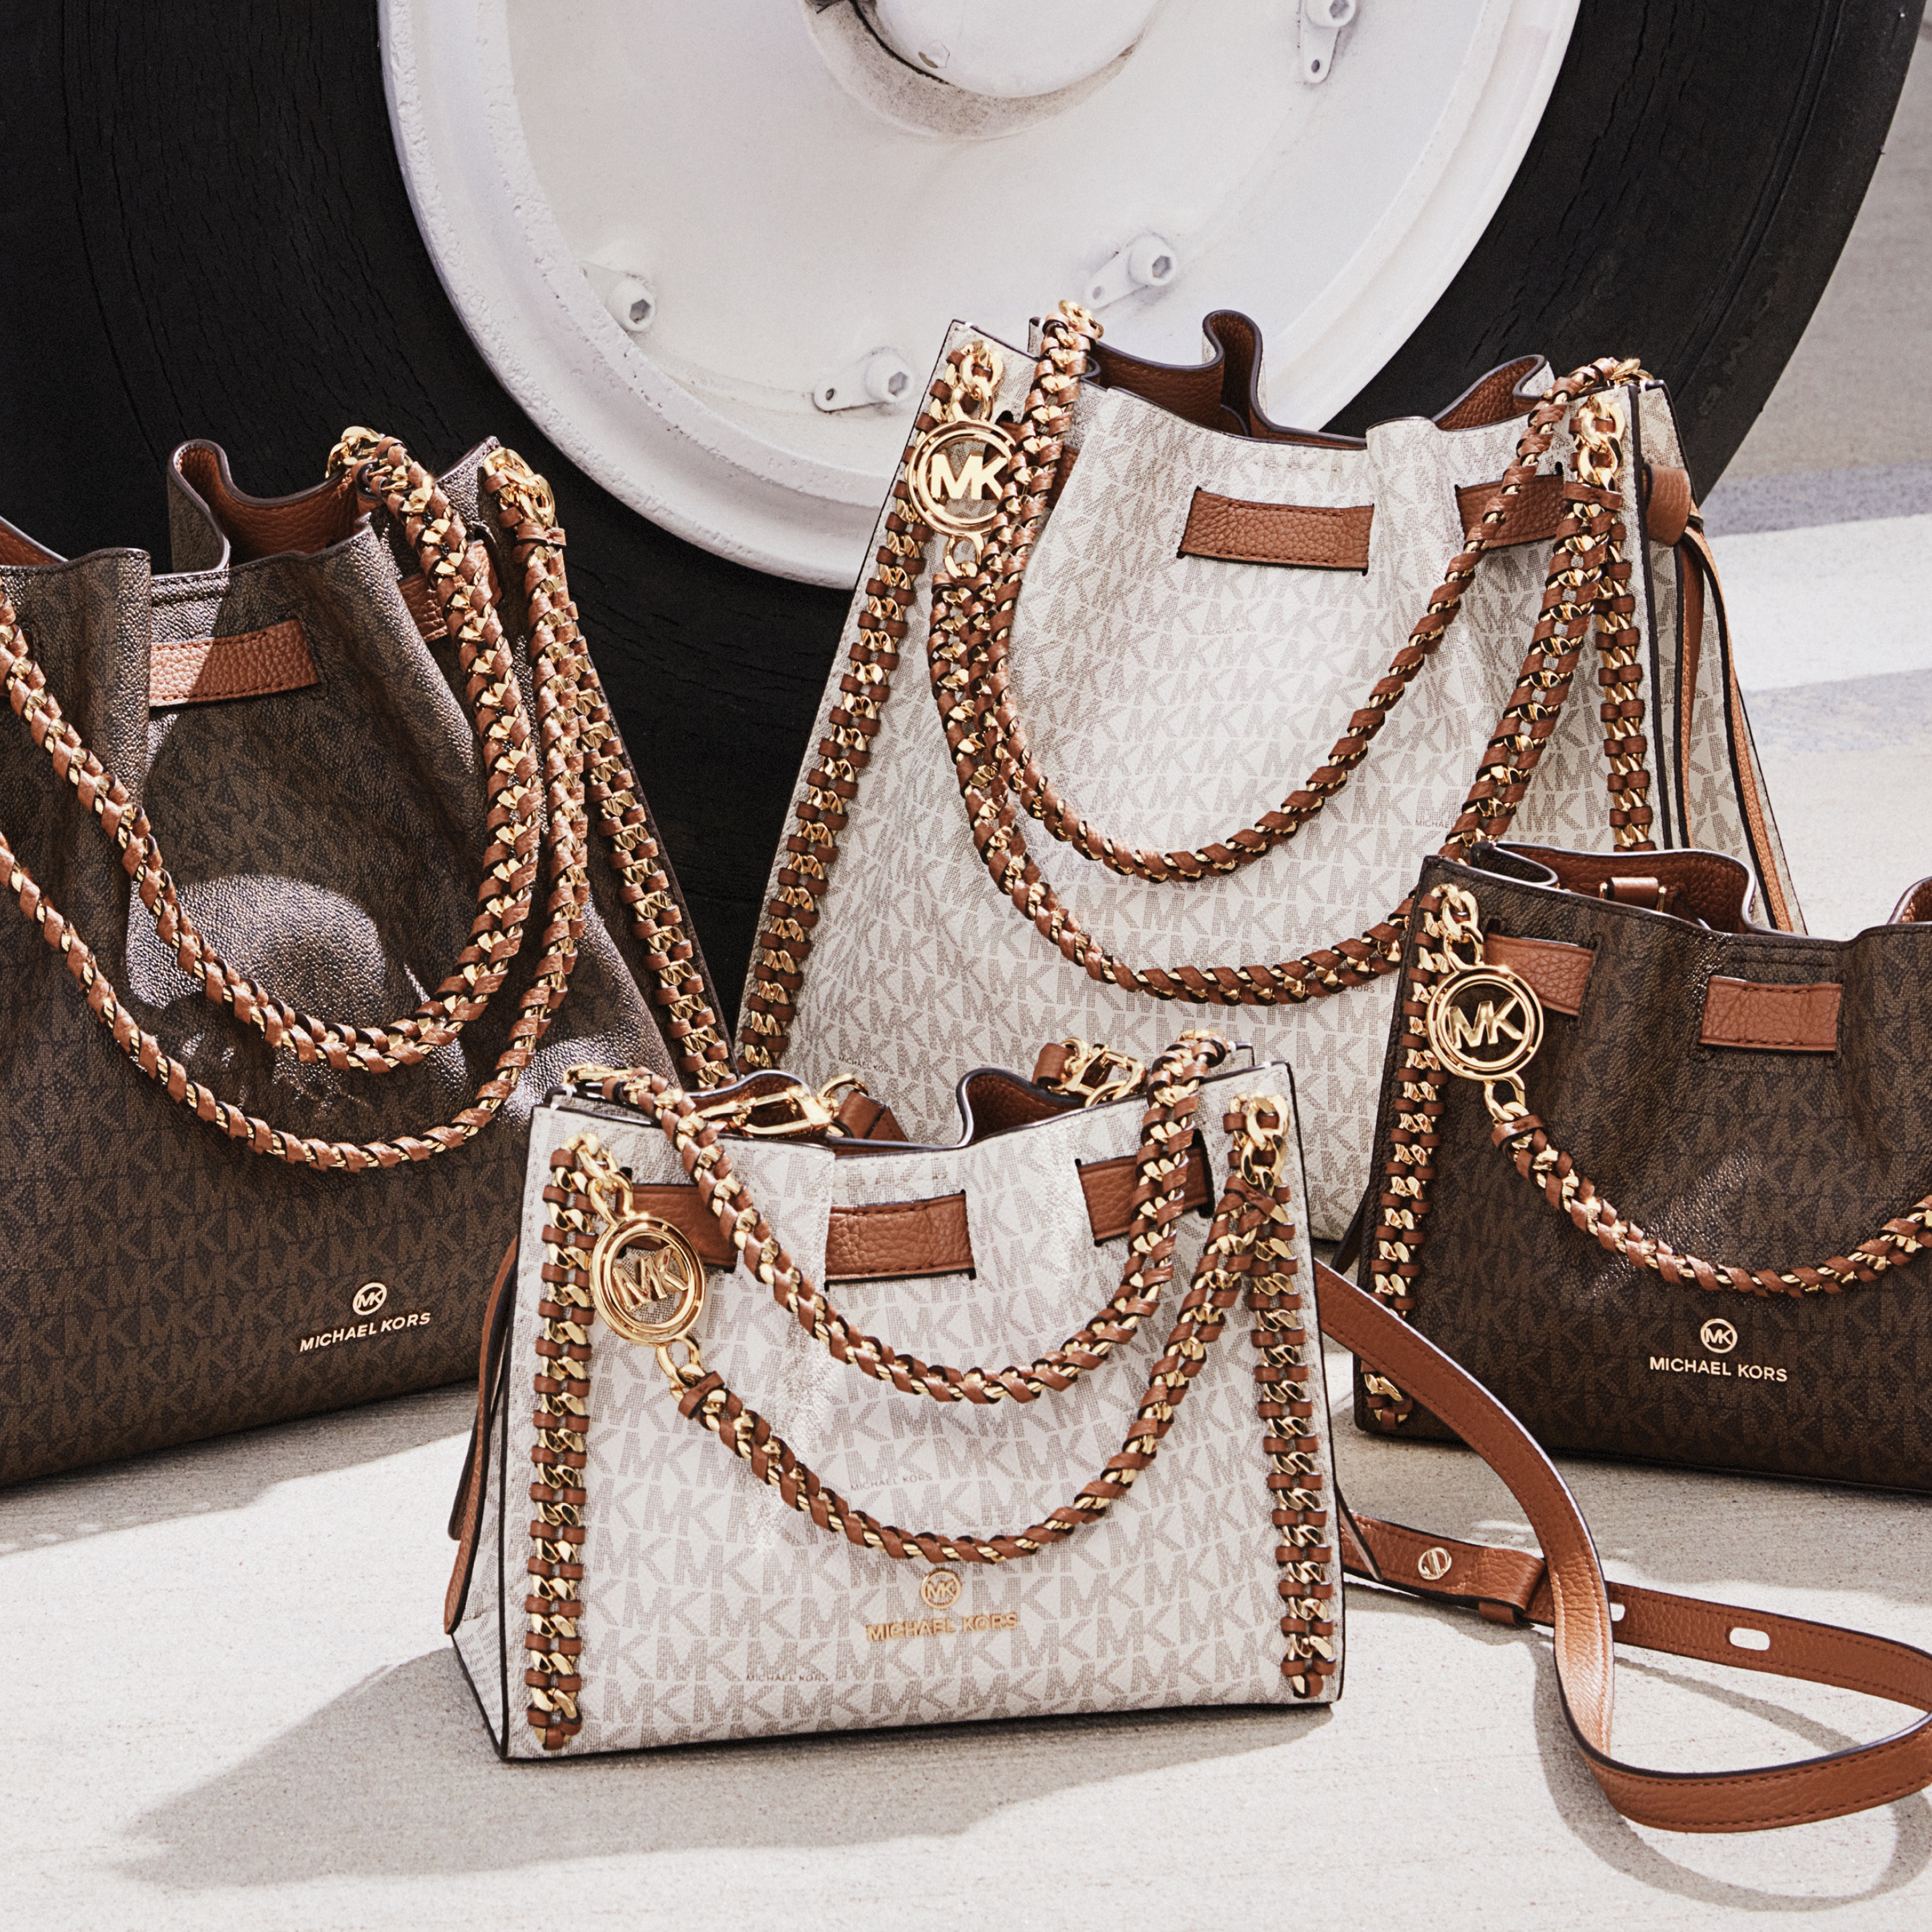 Regelmæssighed præmie Sikker Michael Kors on X: "Get a handle on it: new Mina bags are here! #MichaelKors  https://t.co/pePqiFLM3Z https://t.co/G0dumYTCJE" / X